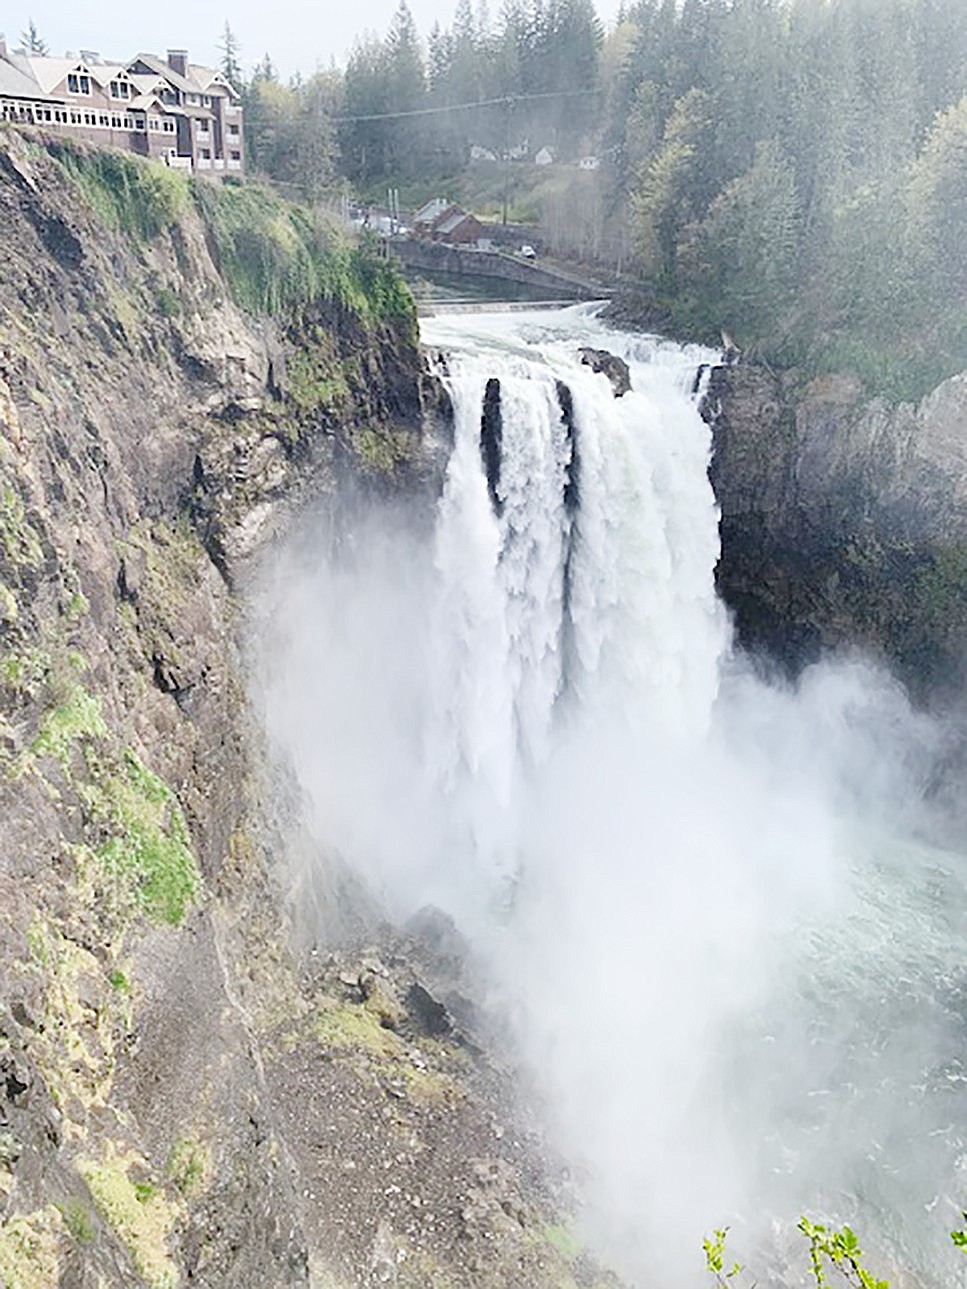 Snoqualmie Falls, Washington, the spectacular natural wonder whose historic hydroelectric plant supplies renewable electricity to the Greater Seattle region.